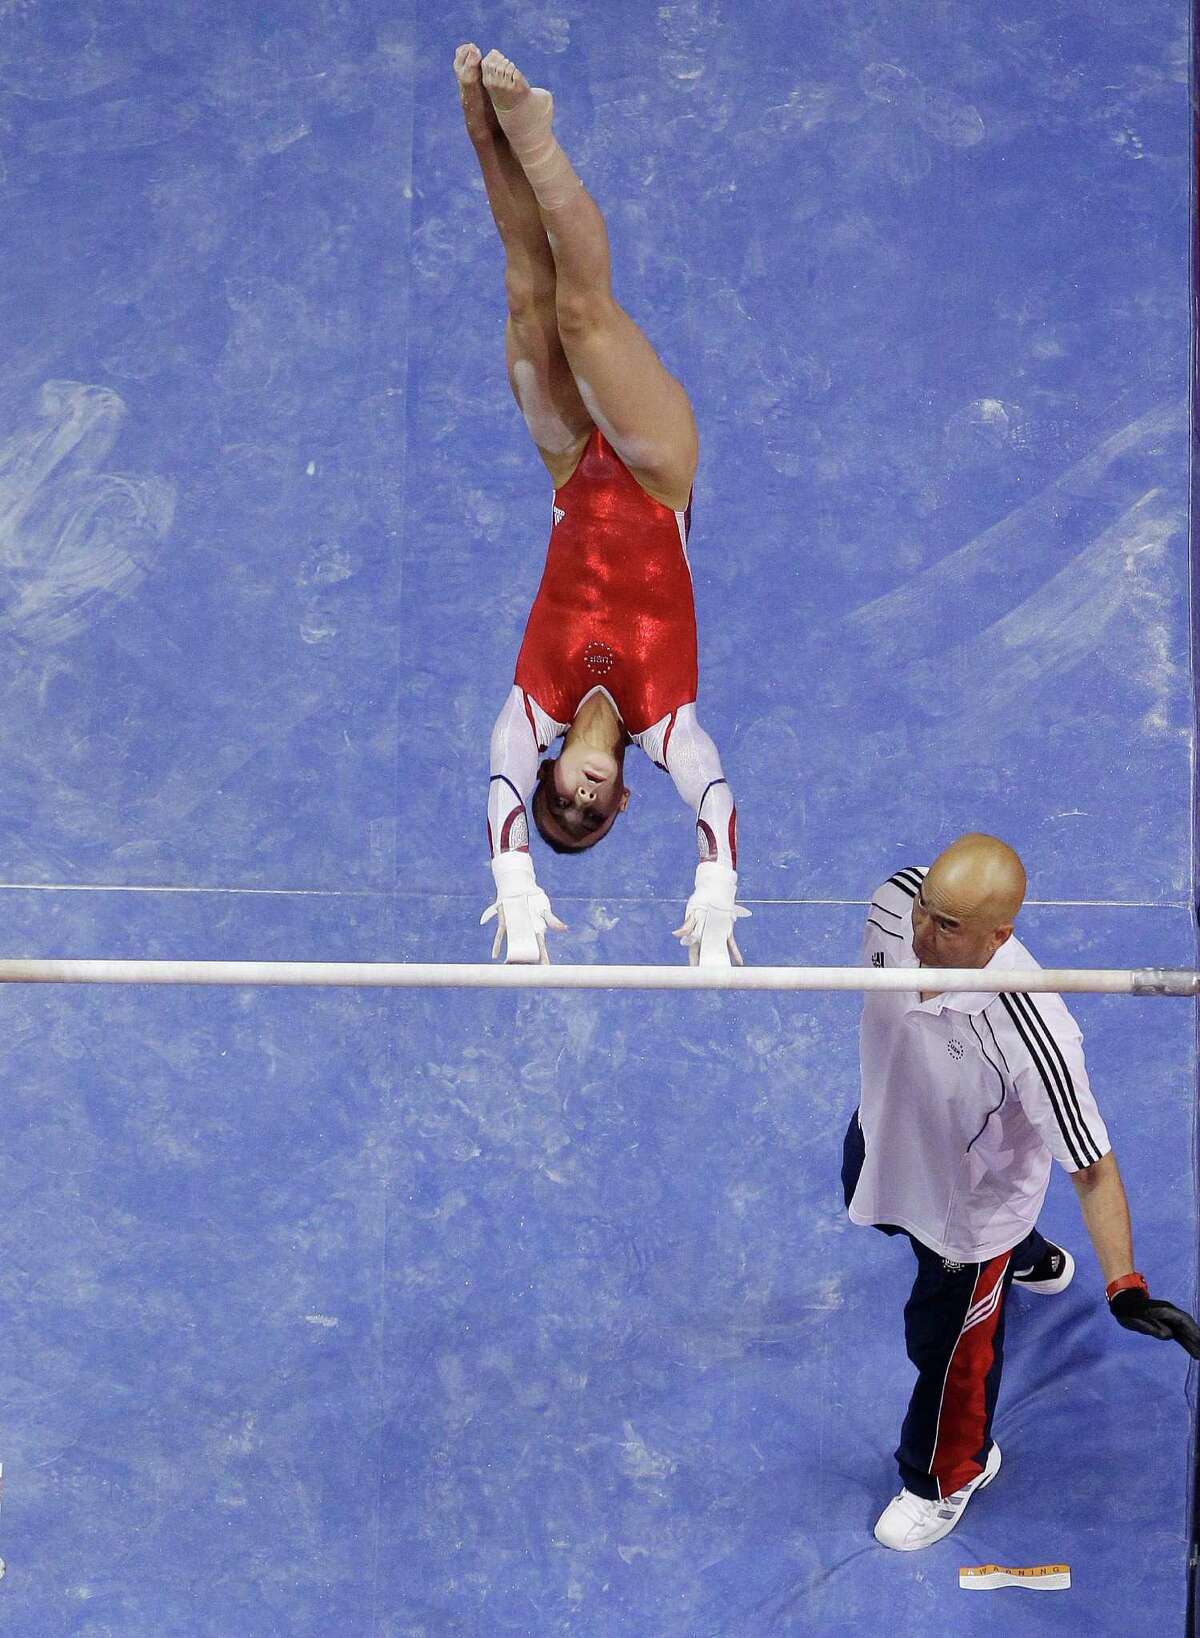 Sarah Finnegan competes on the uneven bars during the final round of the women's Olympic gymnastics trials, Sunday, July 1, 2012, in San Jose, Calif. Finnegan was named to the U.S. Olympic gymnastics team. (AP Photo/Julie Jacobson)